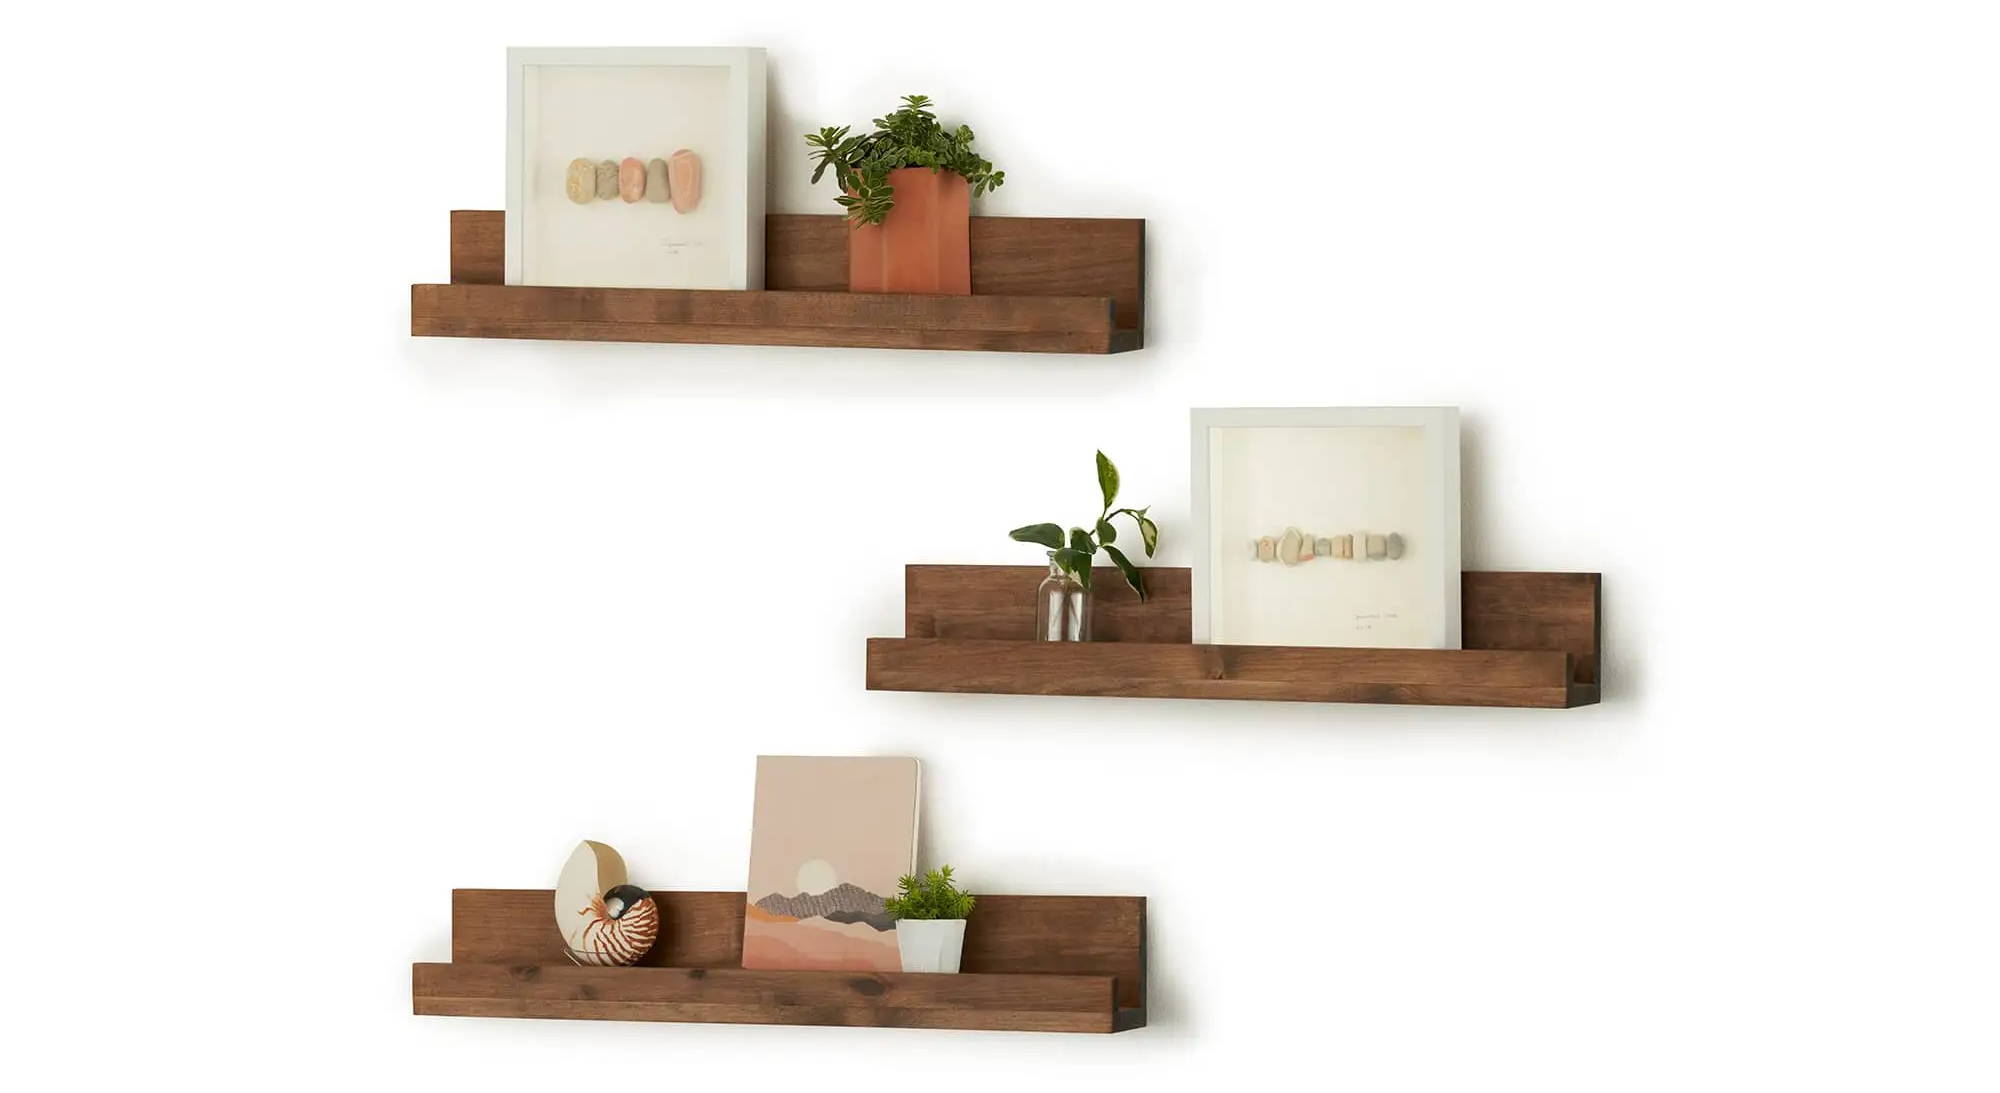 3 floating wall shelves filled with framed art and small planters